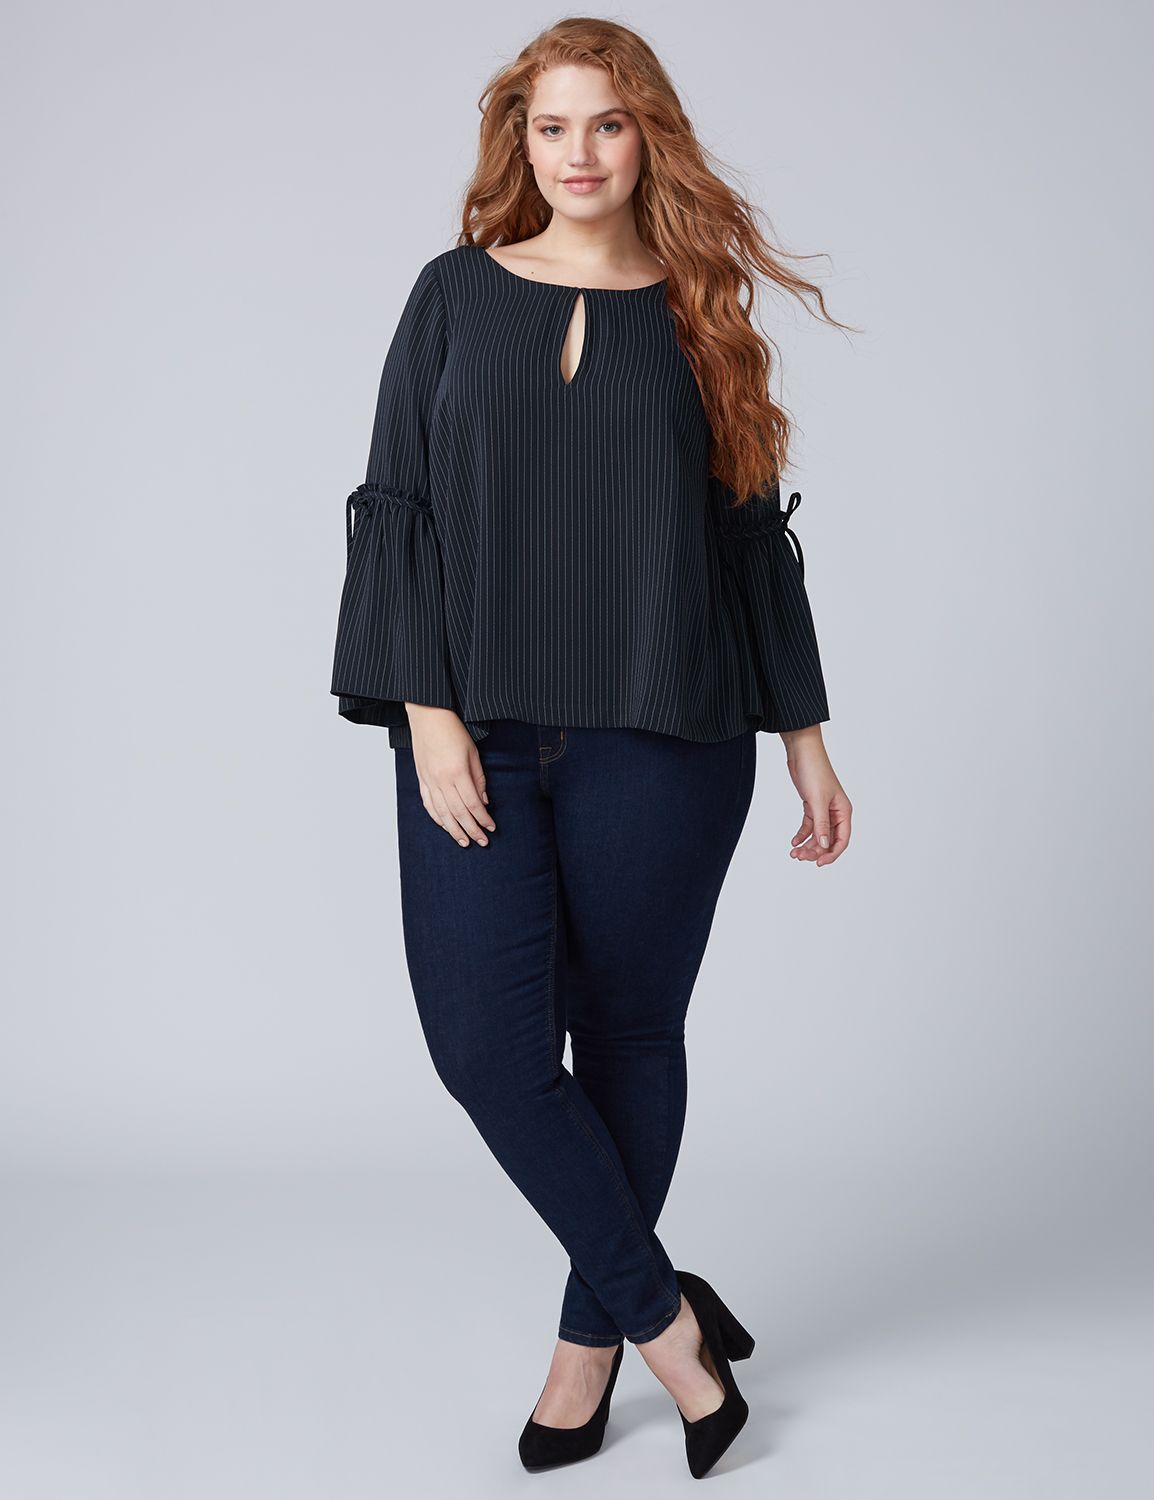 Clearance Tops & Blouses | Plus Size Sweaters, Crop Tops & T-shirts ...